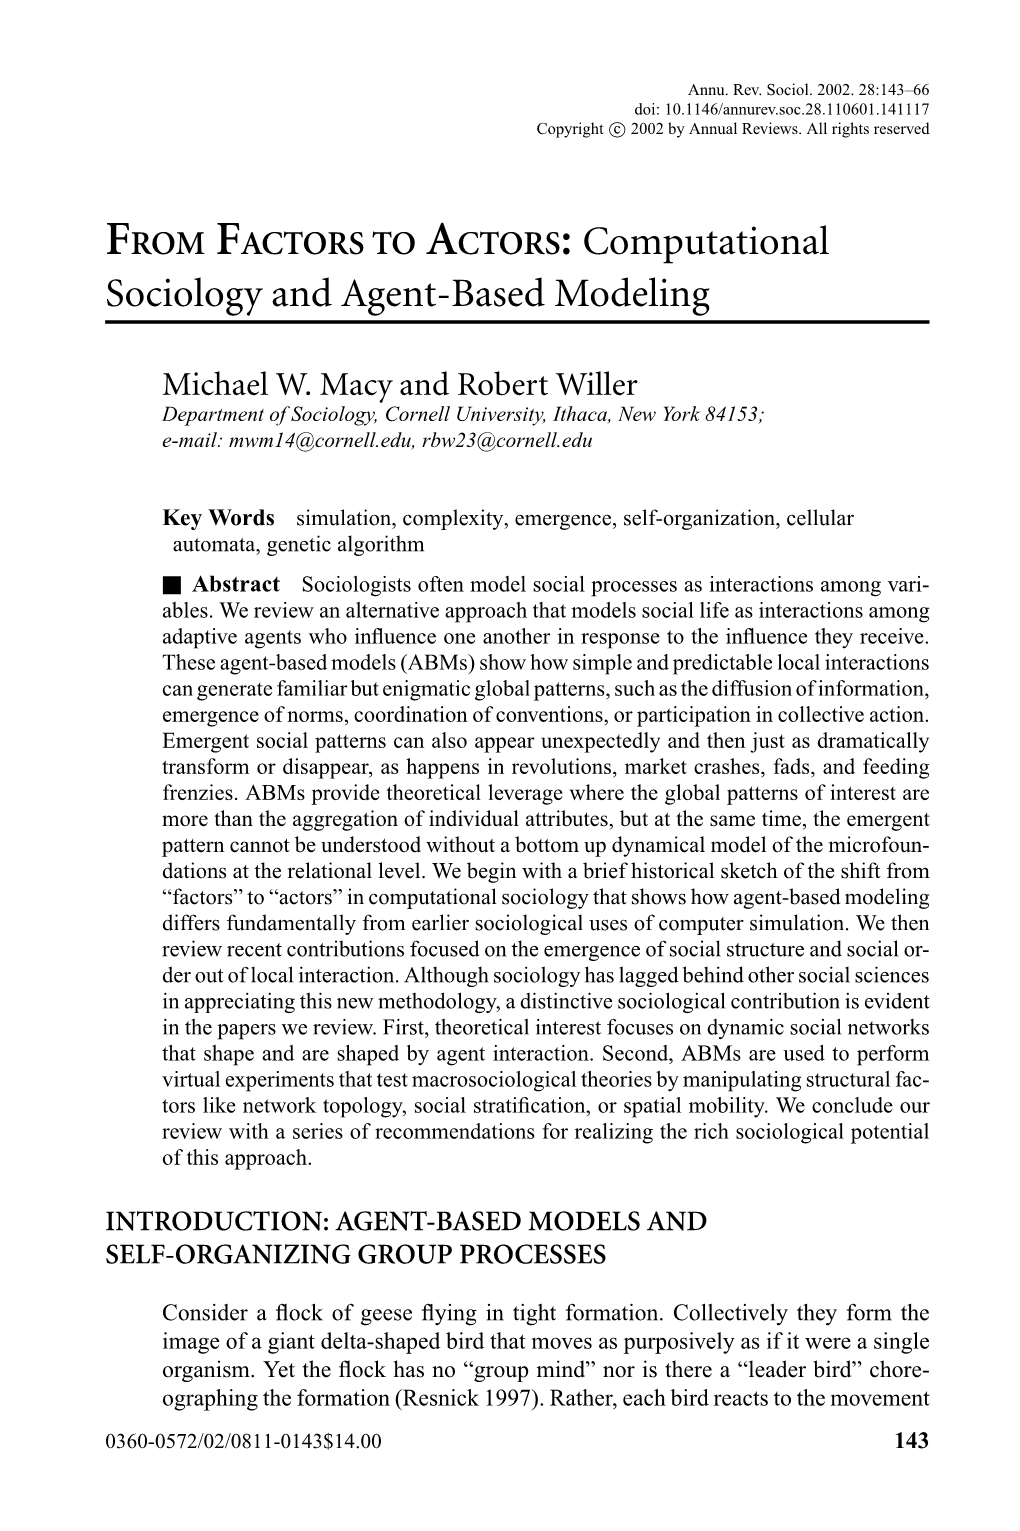 FROM FACTORS to ACTORS: Computational Sociology and Agent-Based Modeling